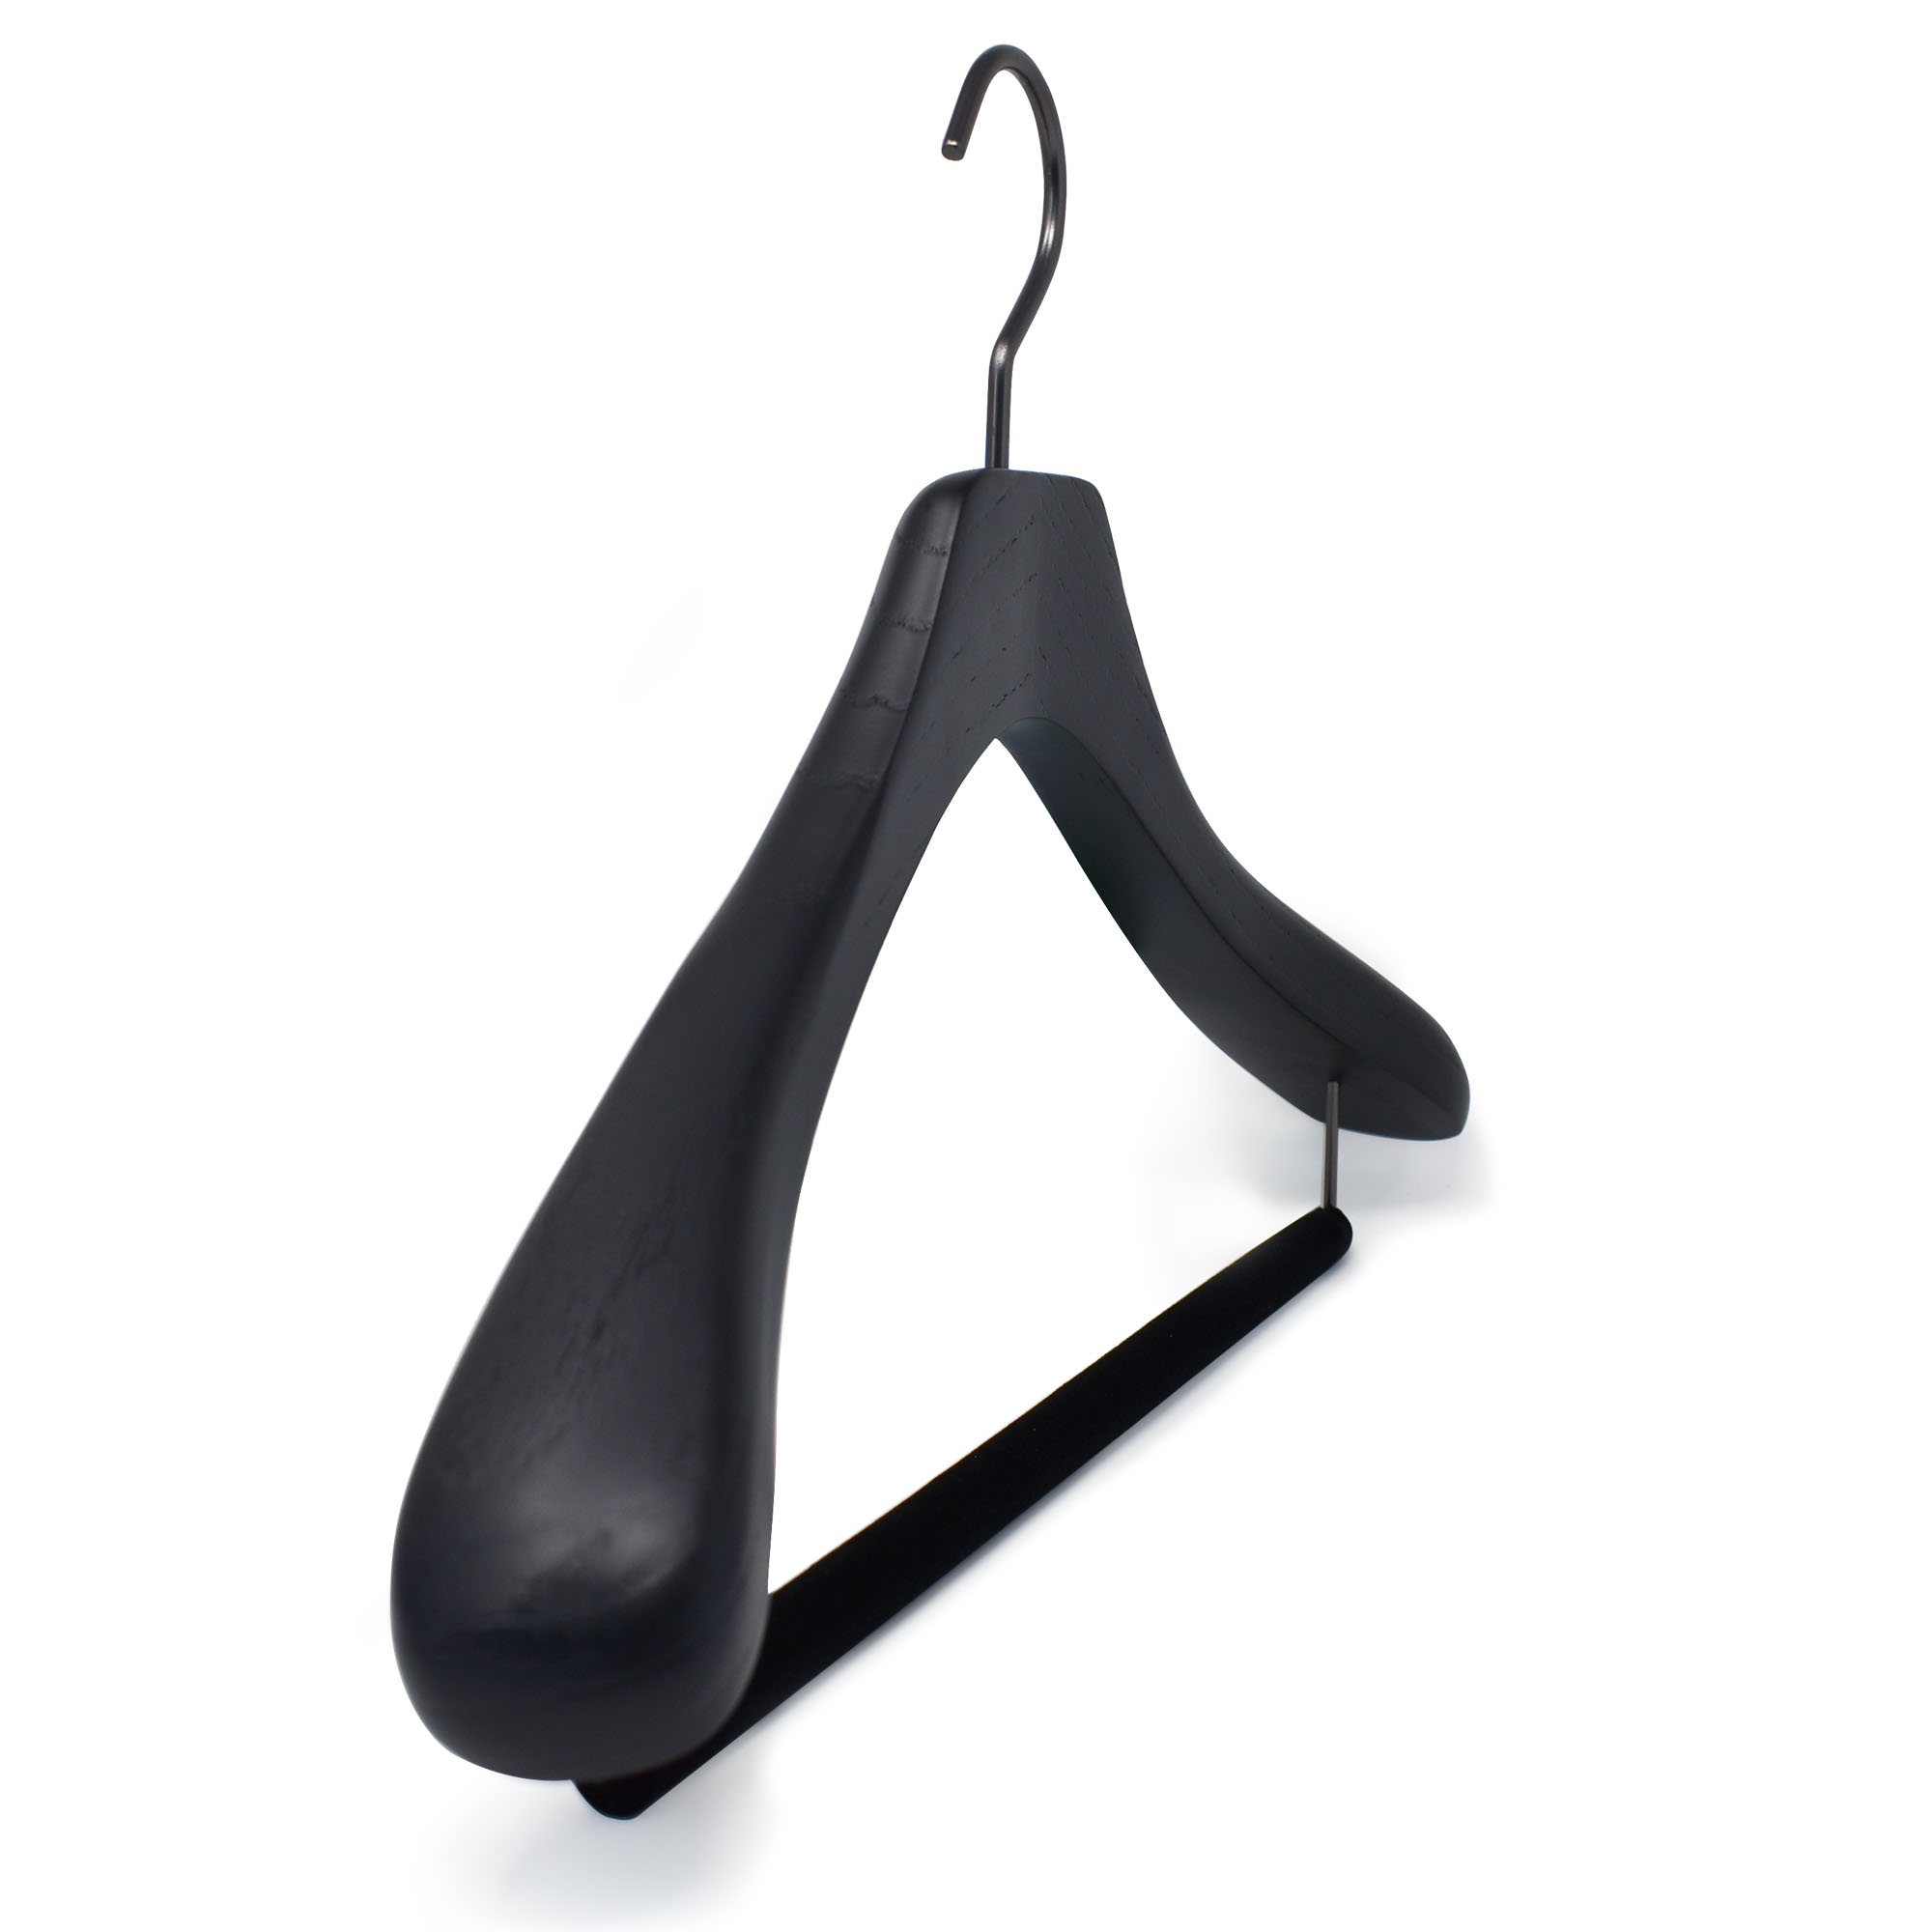 6 luxury hangers for jacket and suit in ash wood - black - brushed wood